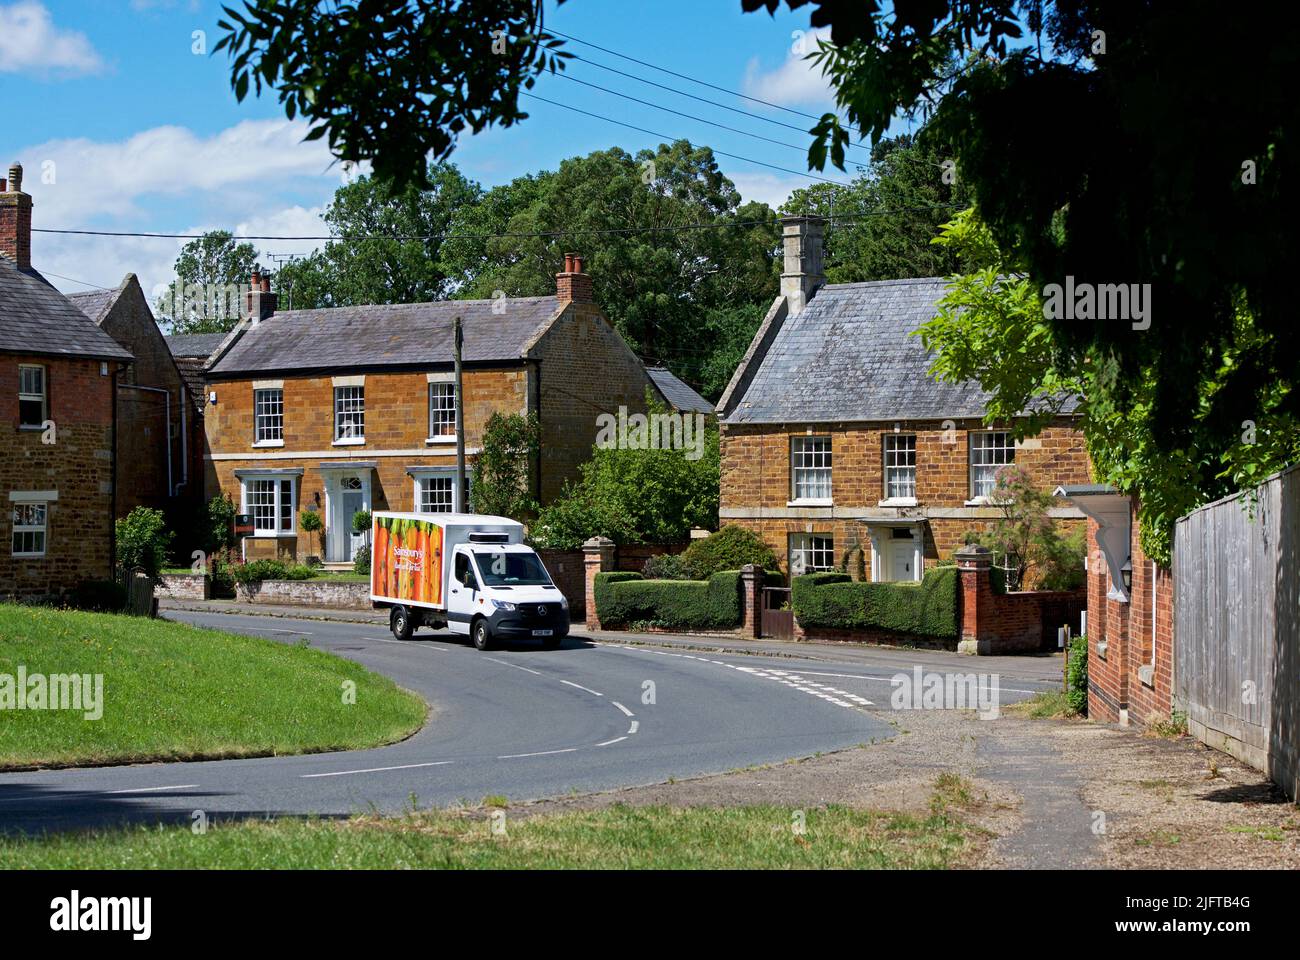 Sainsbury's delivery van in the village of Weston by Welland, Northampton, England UK Stock Photo